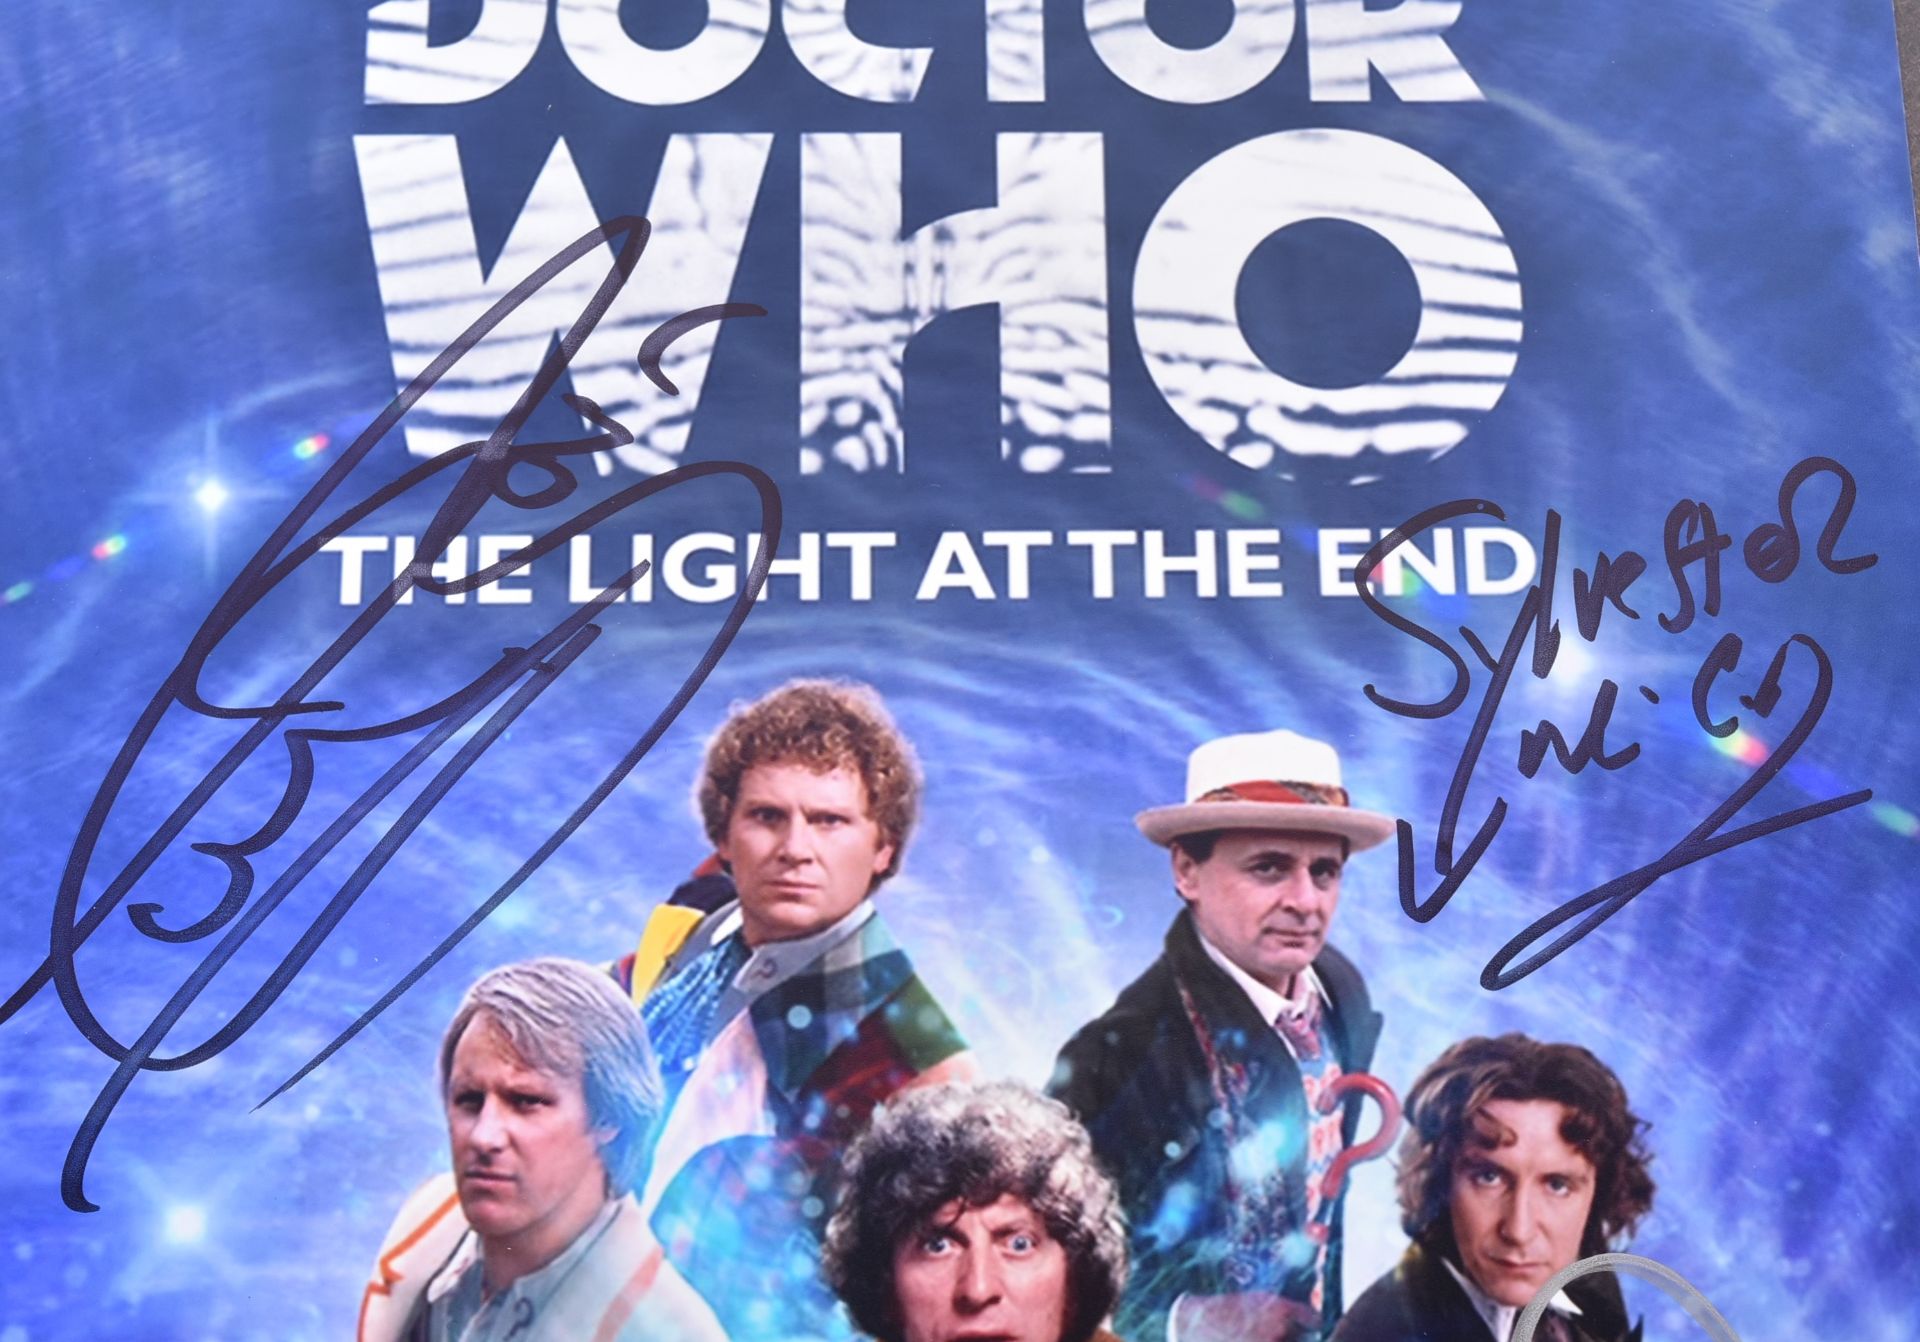 DOCTOR WHO - THE DOCTORS - AUTOGRAPHED 8X10" PHOTO - Image 2 of 3